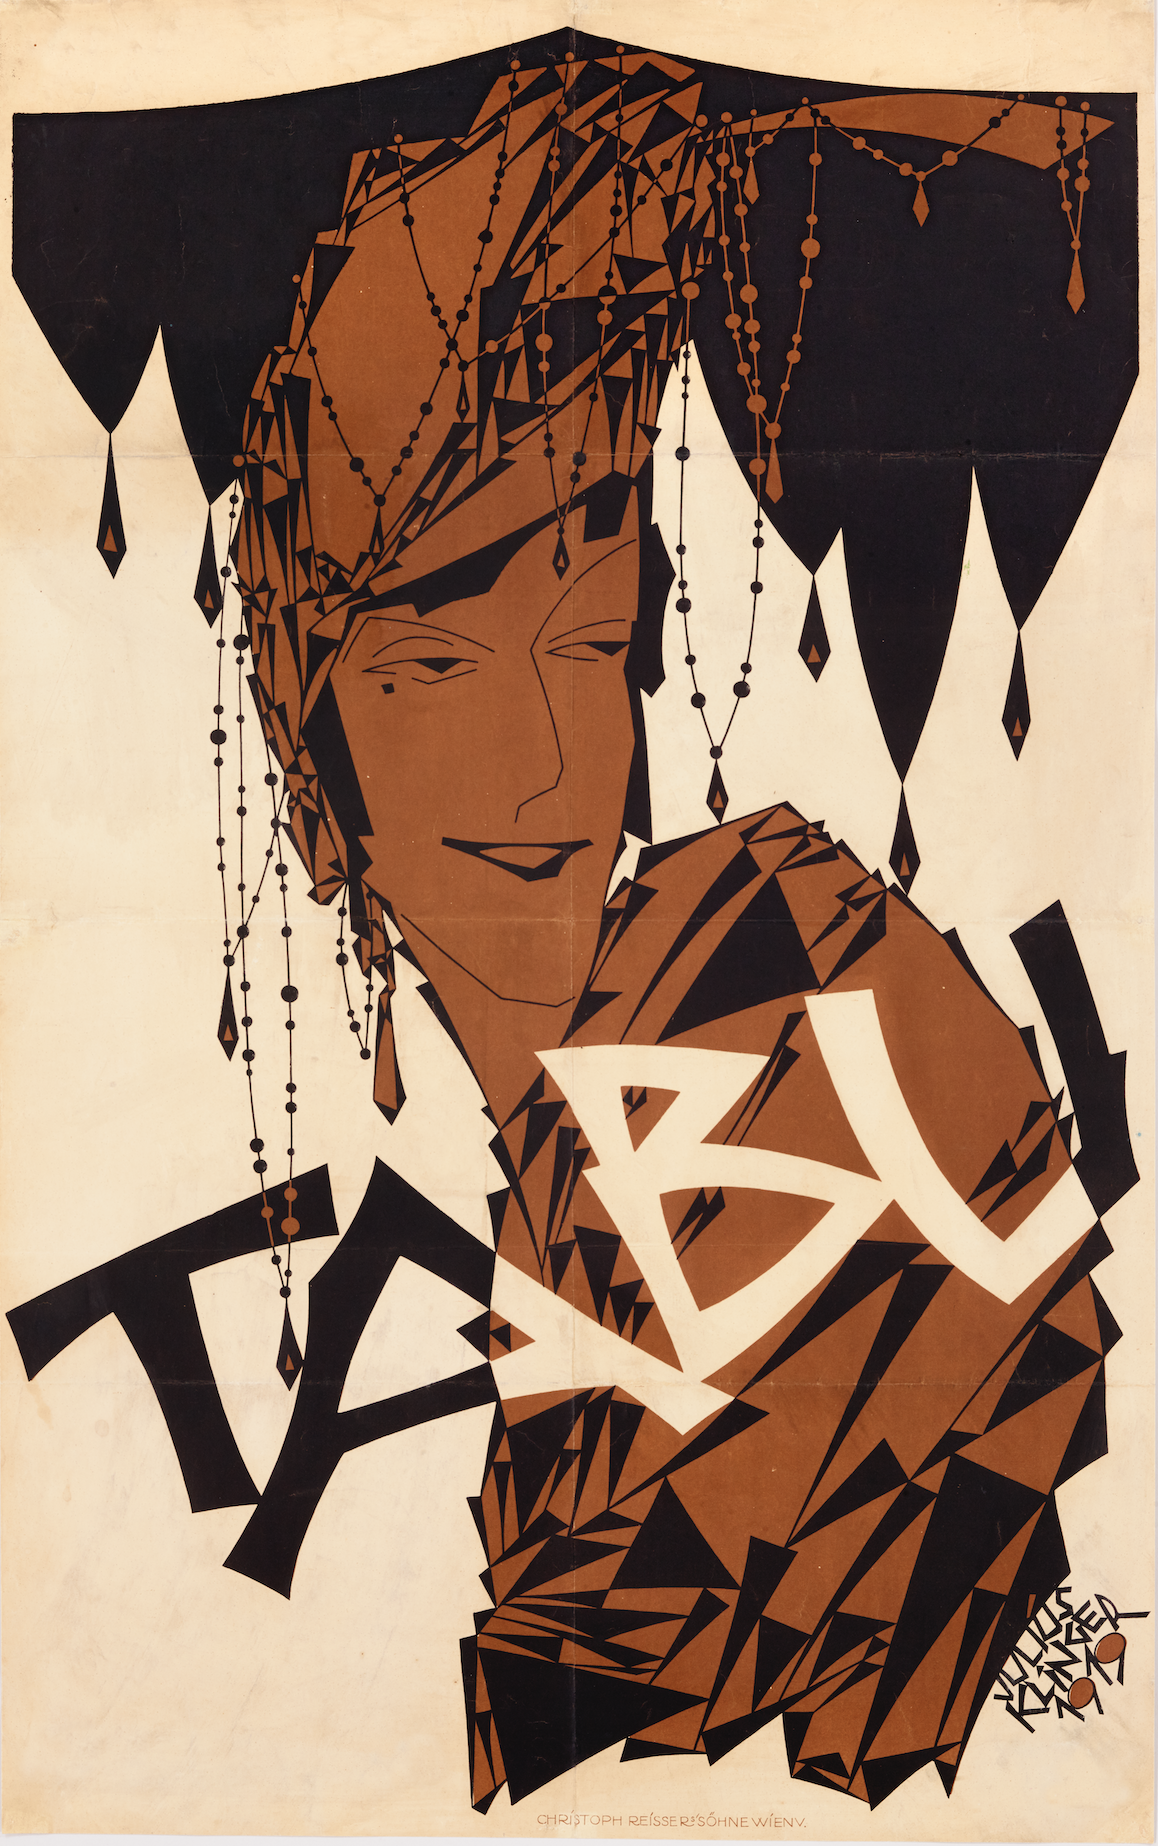 Lithographic poster in brown and black hues of a woman in an elaborate headdress